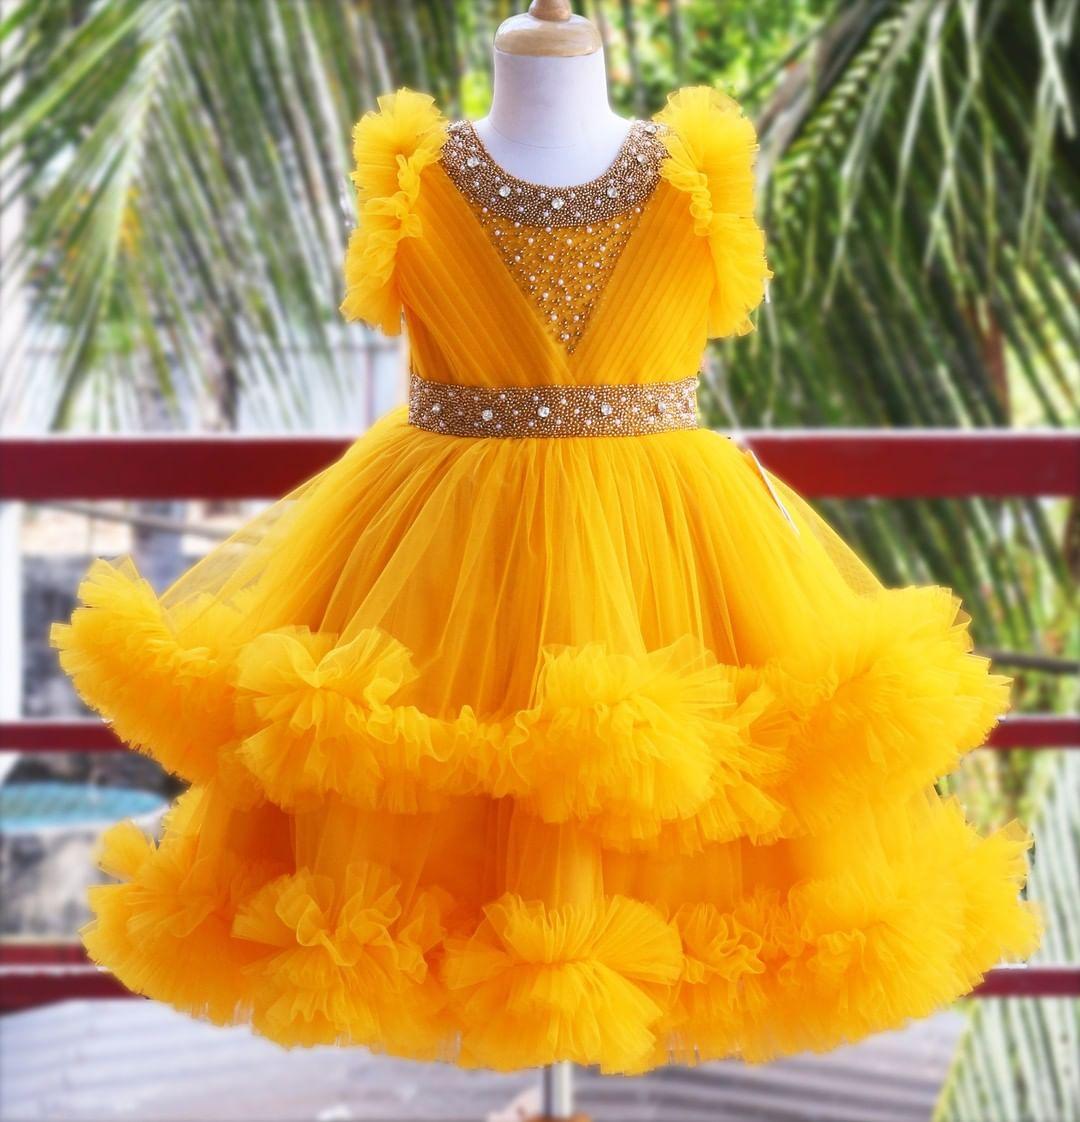 Mango Yellow Handwork Two Layer Ruffled Frock
Material: Mango Yellow  Shade Pleated Ruffled Frock mono net with layered and ruffles on the end portion. Yoke portion is designed with pleated pattern and golden b